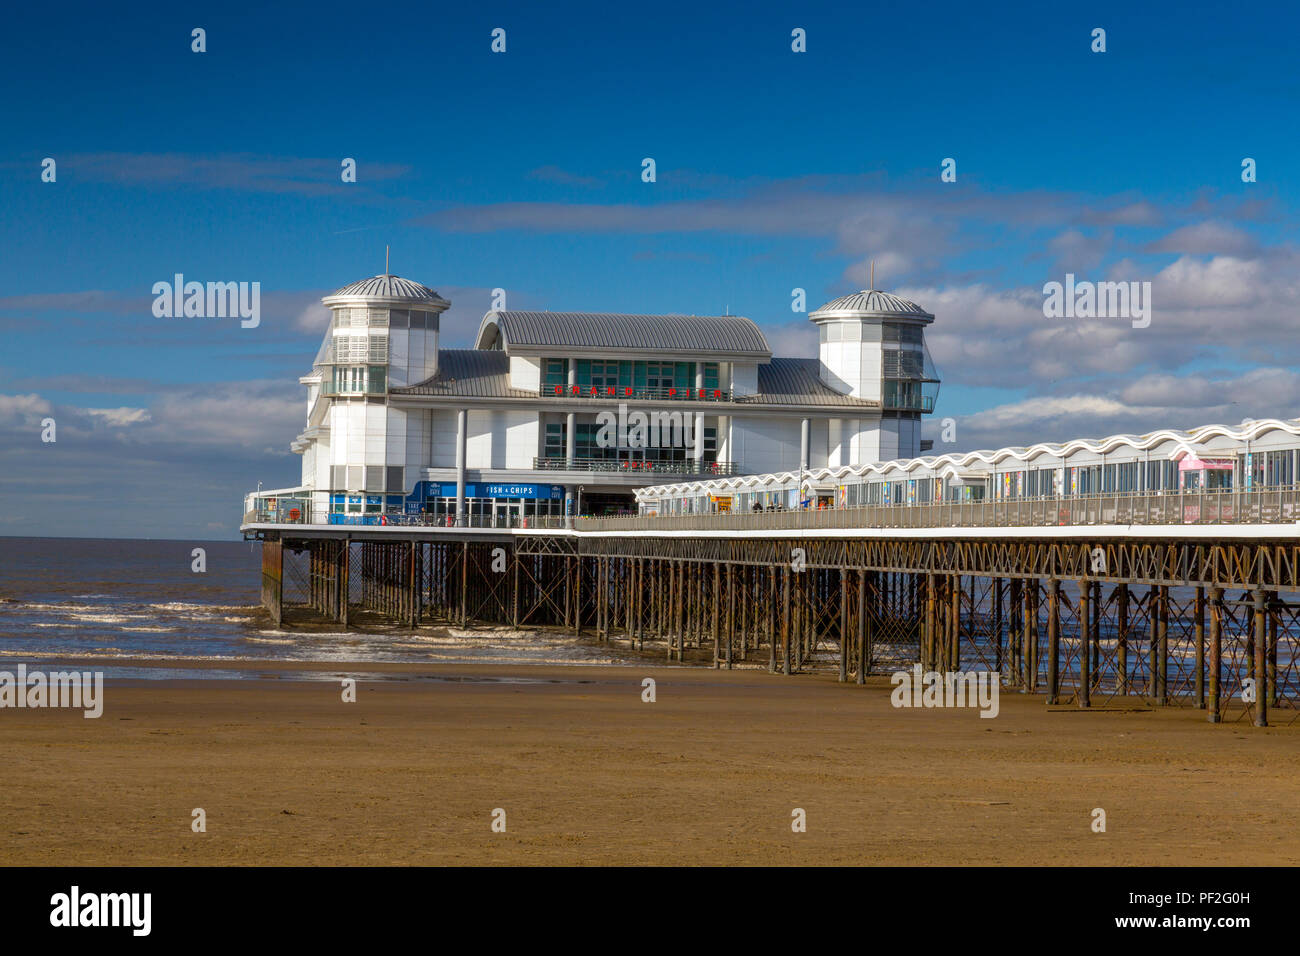 A deserted beach and Grand Pier at low tide in winter at Weston-super-Mare, North Somerset, England, UK Stock Photo